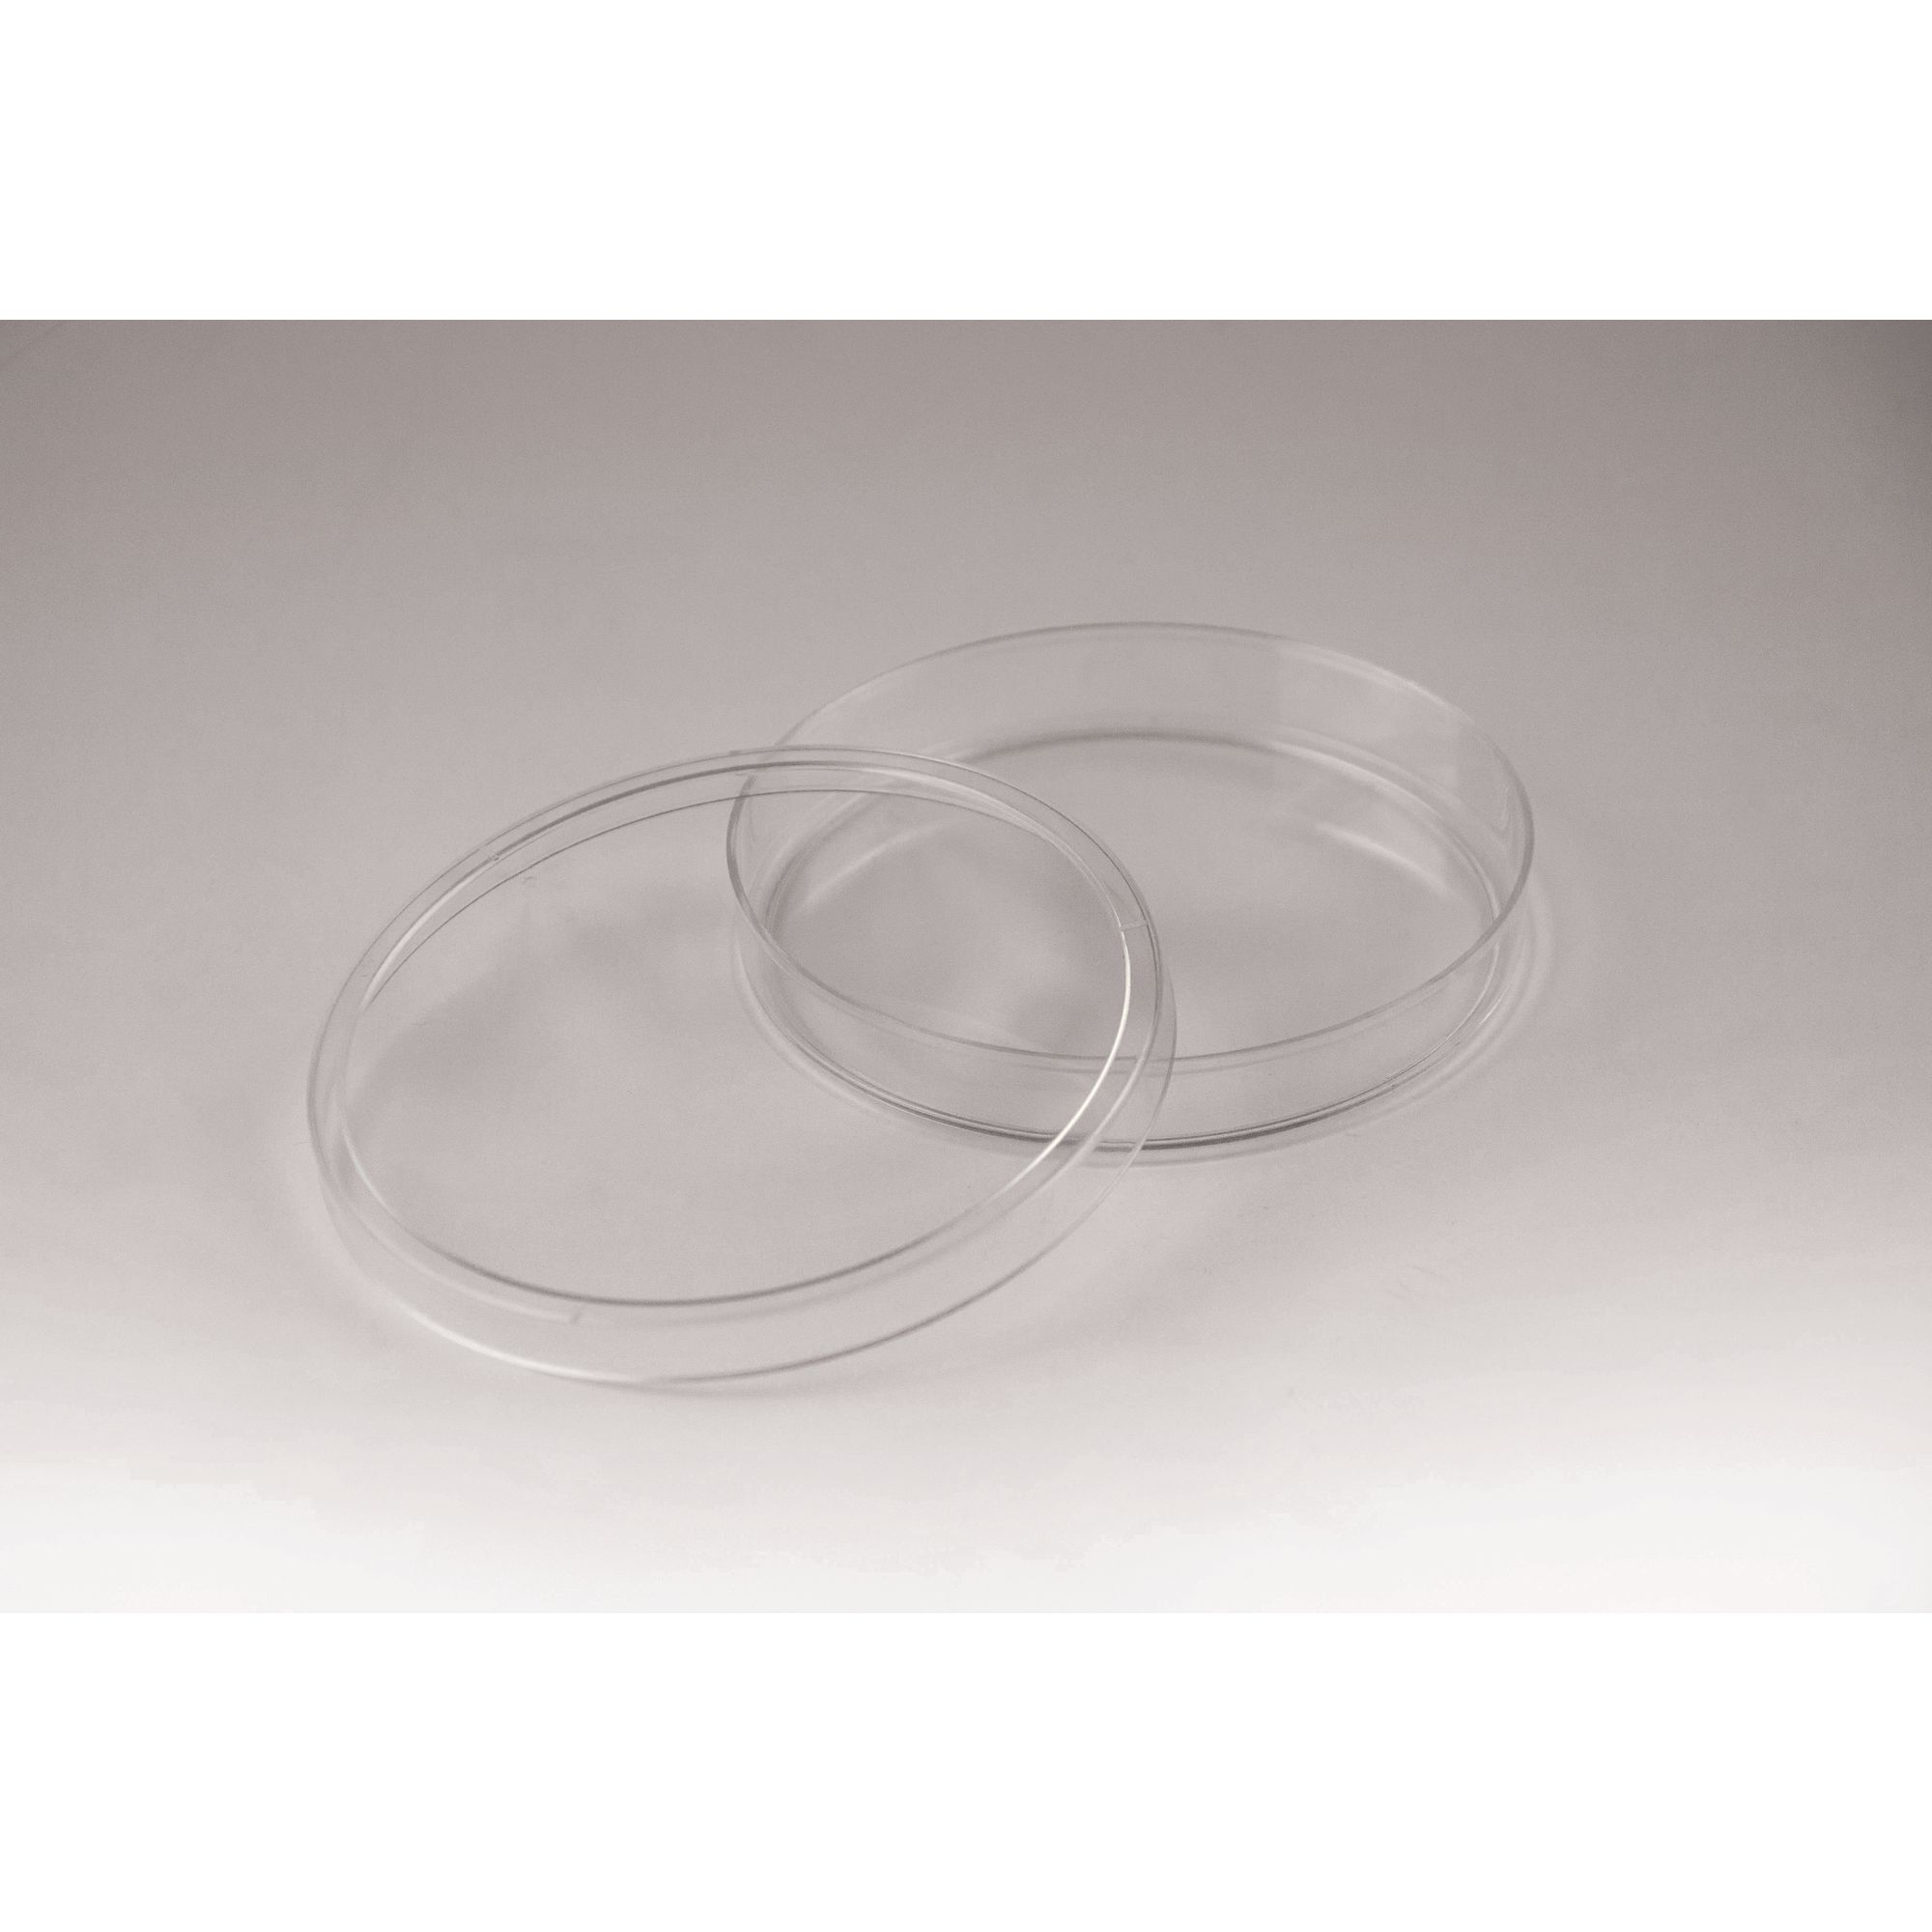 Petri Dishes, Disposable - 90 x 15mm - Pack of 500